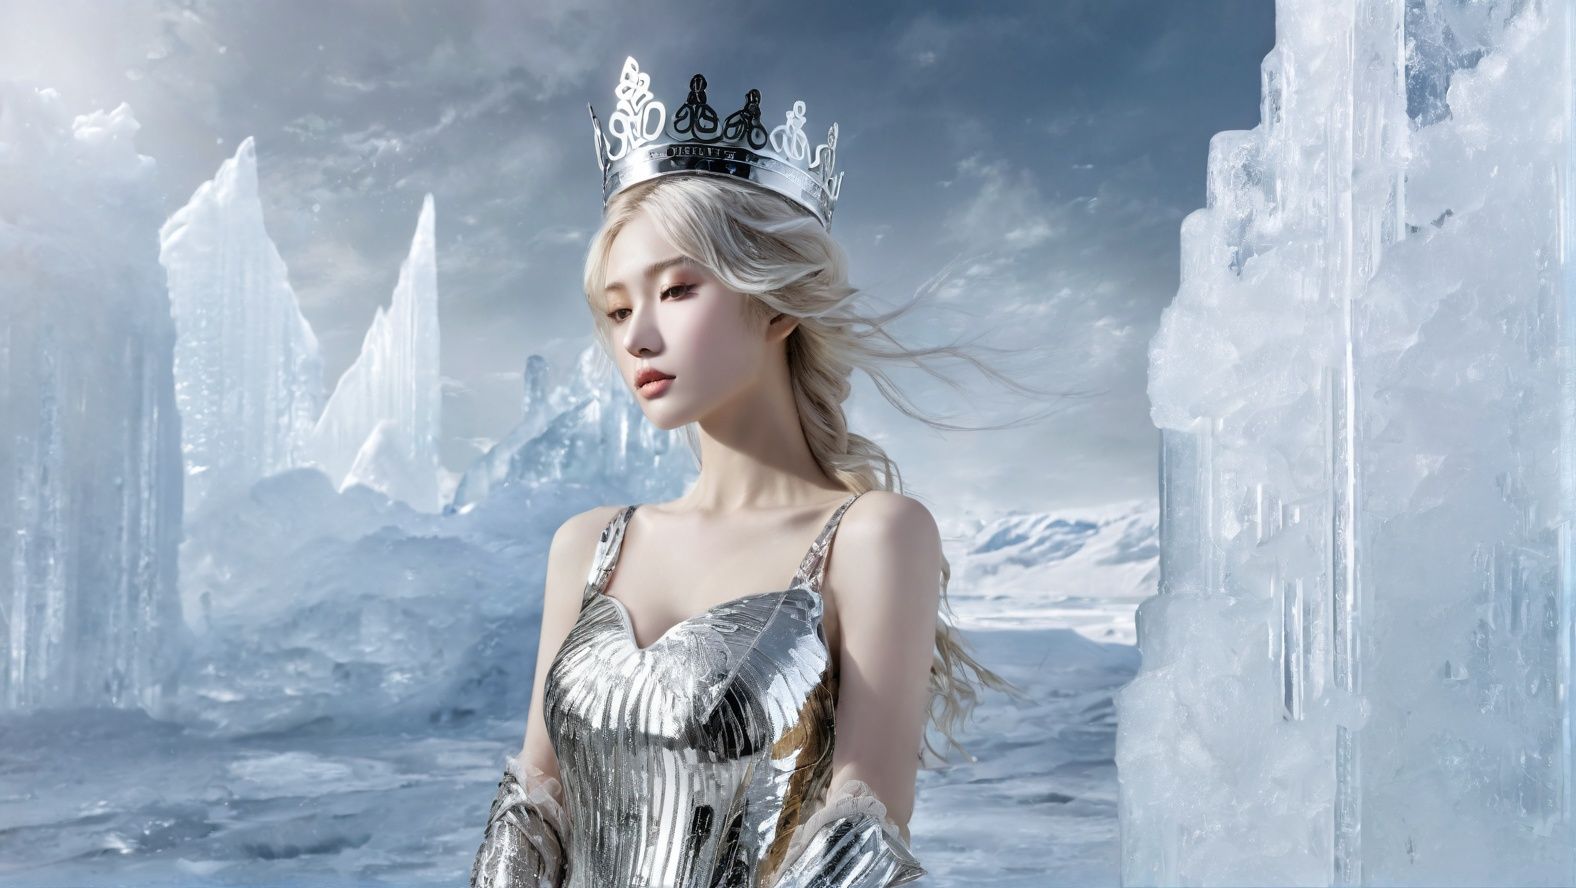 (1girl:1.1),(solo:1.5),Extremely gorgeous metal style,Metal crown with ornate stripes,Various metals background,Sputtered molten iron,floating hair,Hair like melted metal,Clothes made of silver,Clothes with gold lace,flowing gold and silver,everything flowing and melt,flowing iron,flowing silver,lace flowing and melt,<lora:0902xl试验班014:0.7>,ukl,background future city,sci-fi wind,snow,ice,upper_body,portrait,8k,high quality,photo,iceberg,<lora:科幻-雪城黑红sdxl:0.3>,